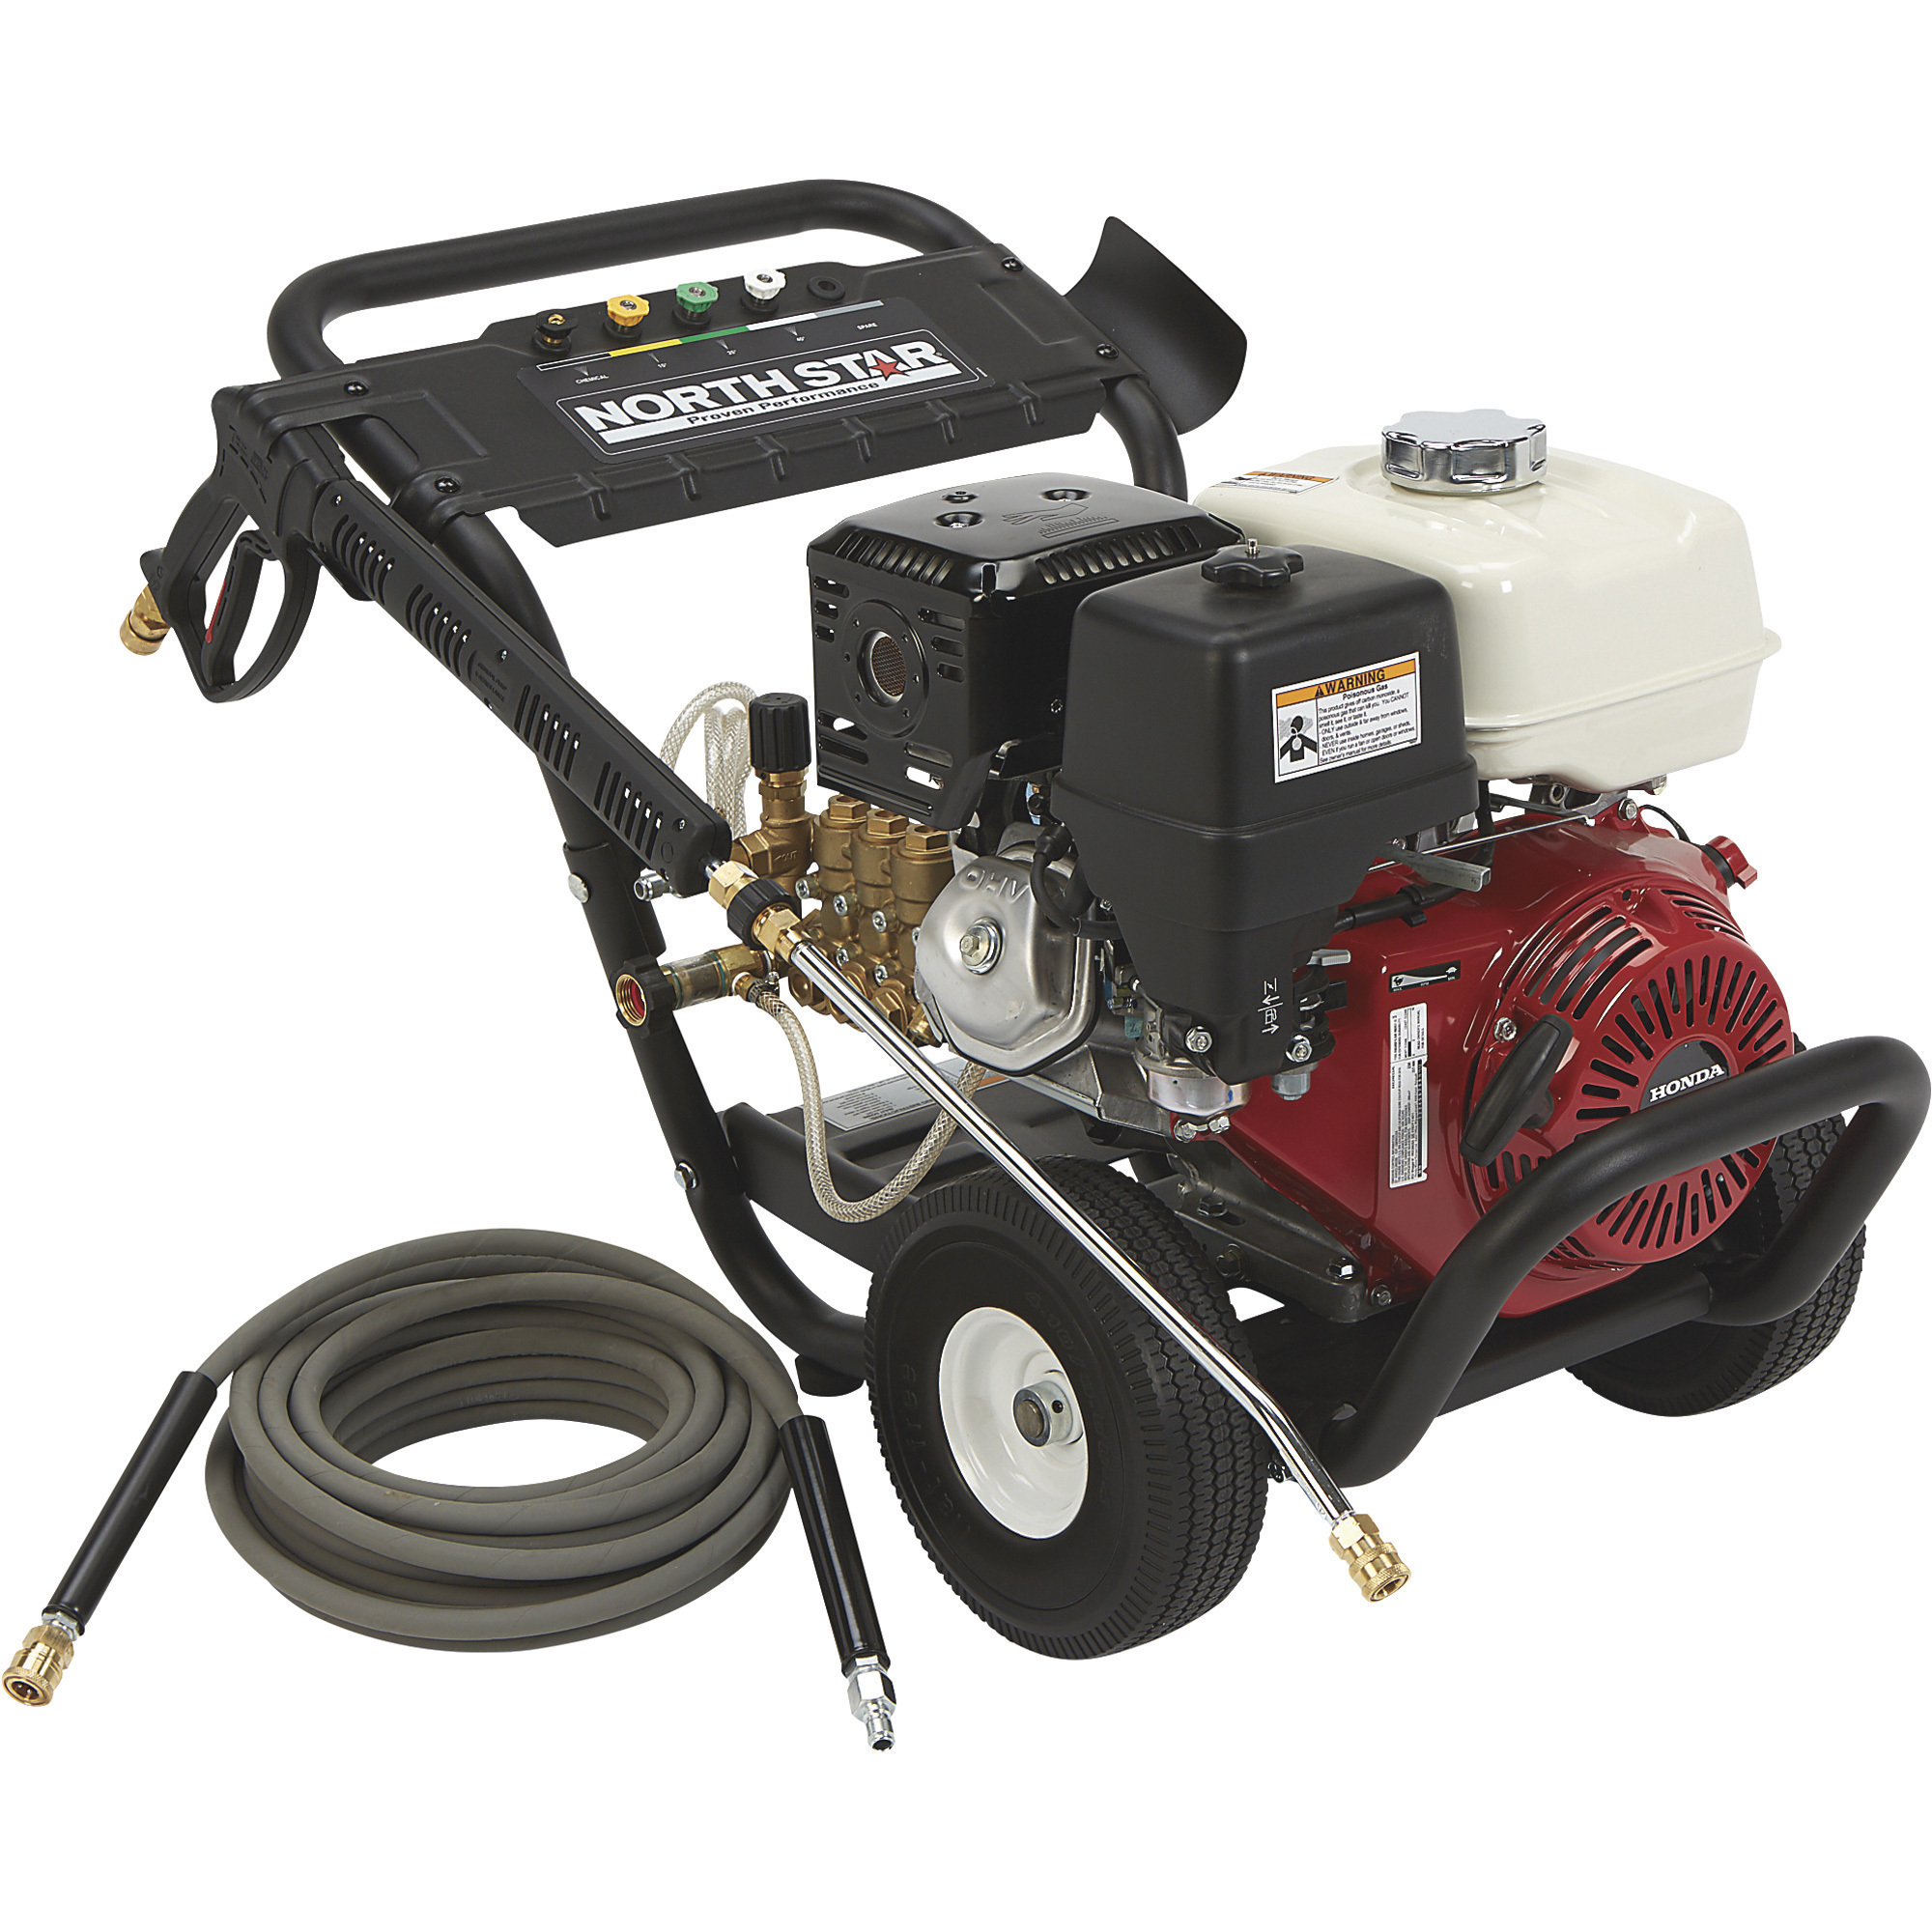 NorthStar Gas Cold Water Pressure Washer, 4200 PSI, 3.5 GPM, Honda Engine, Model 157127